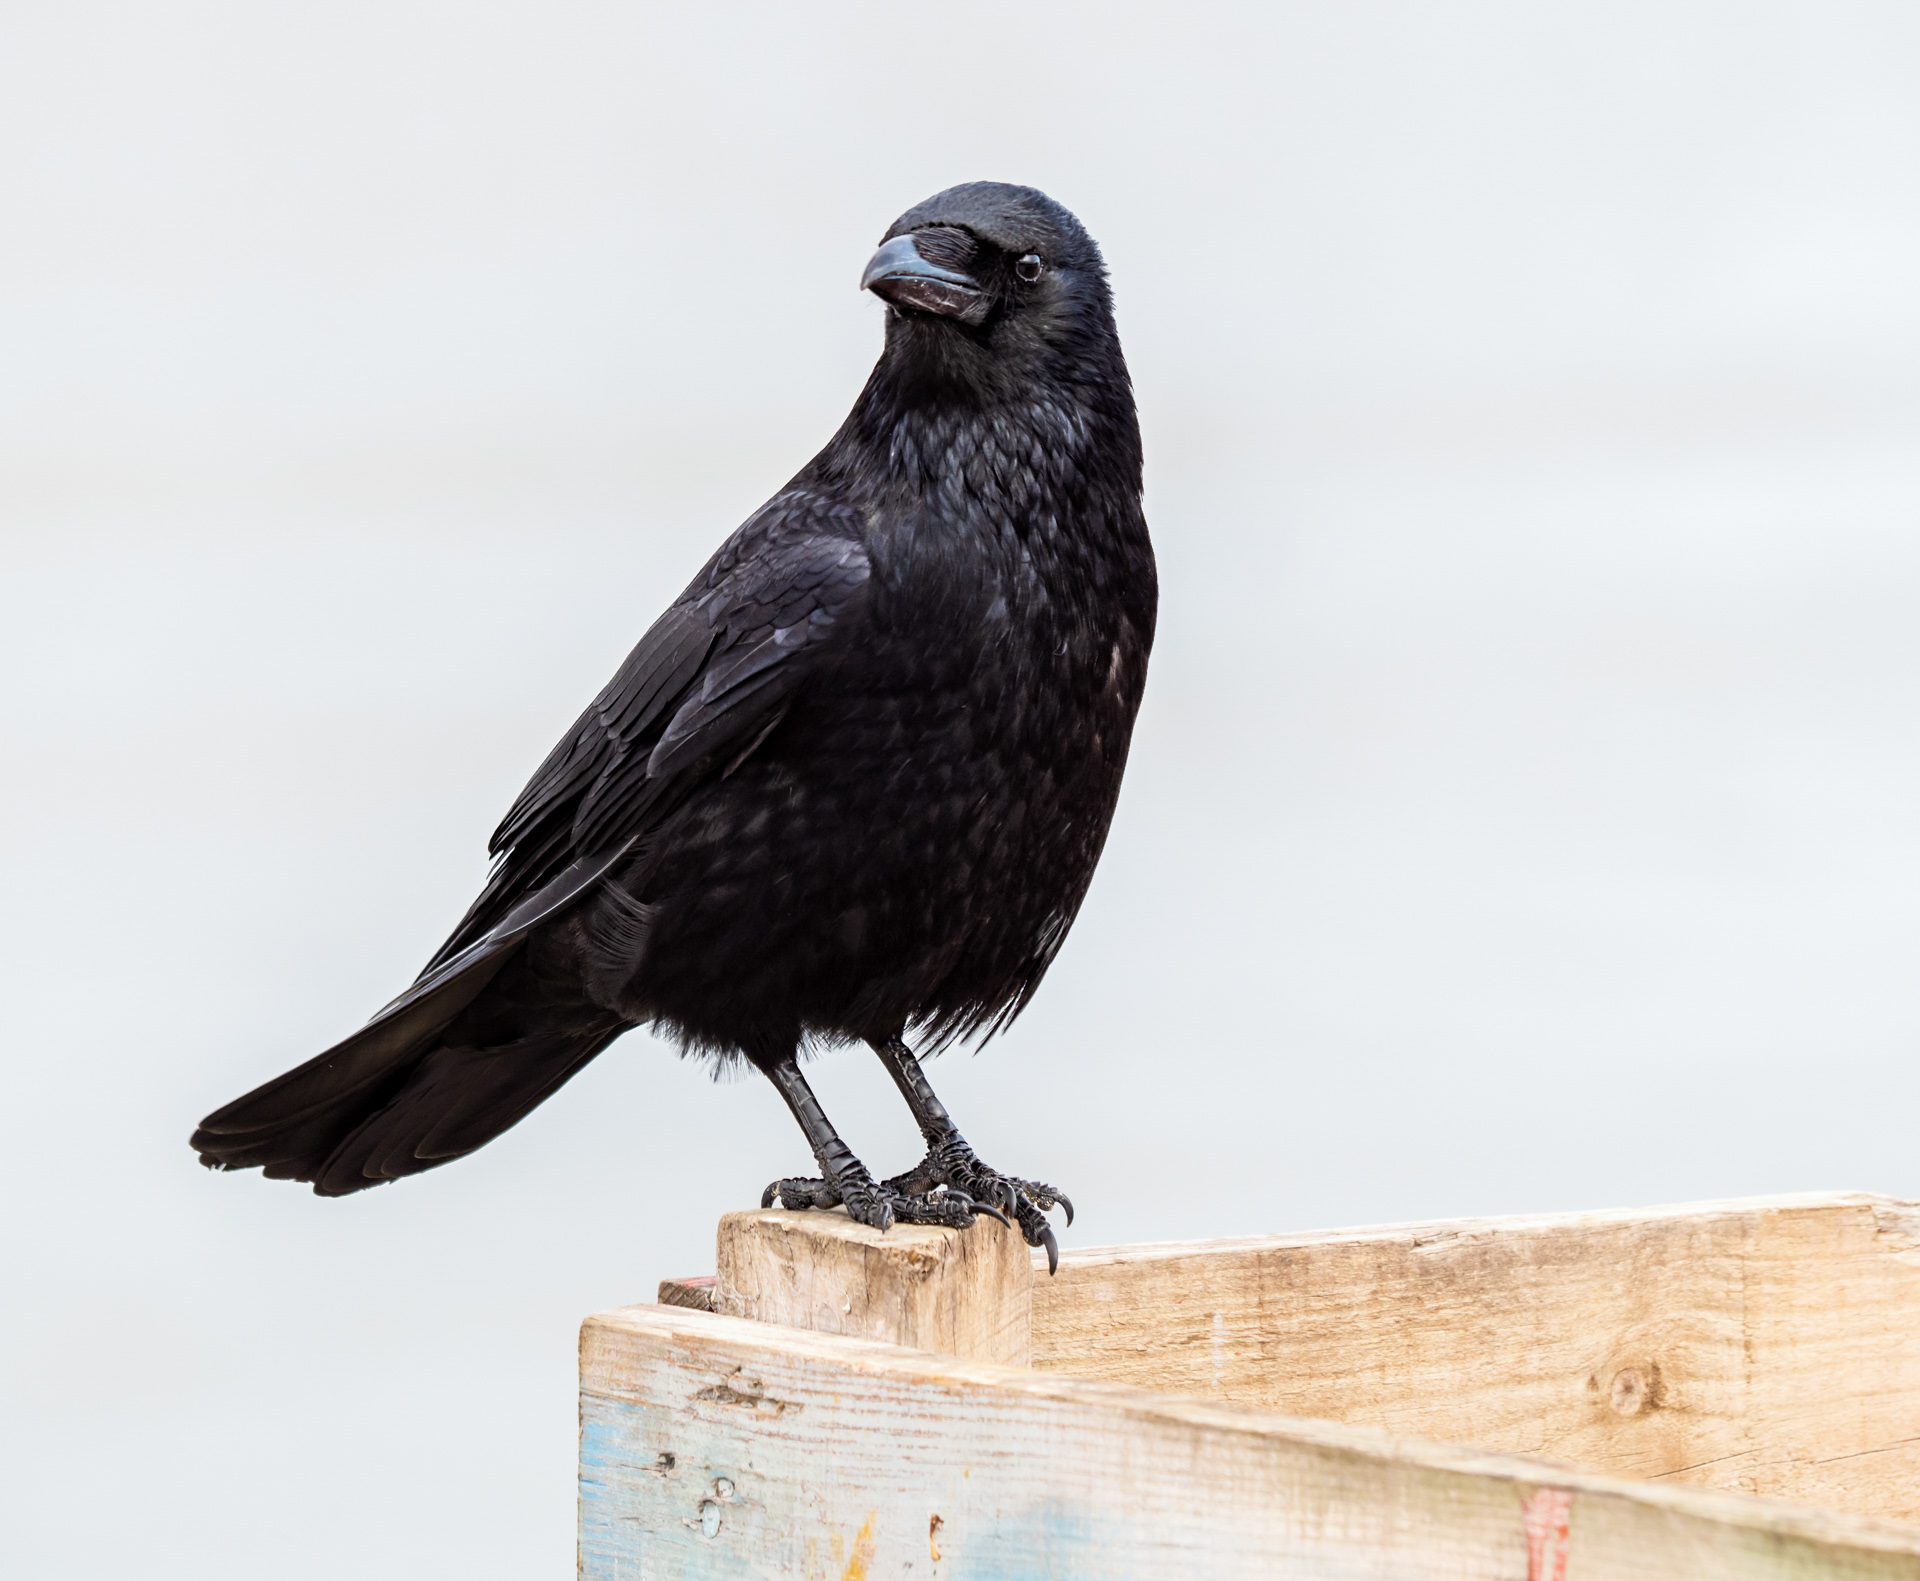 Carrion Crow is one of our commonest birds seen in harbours and along the coast